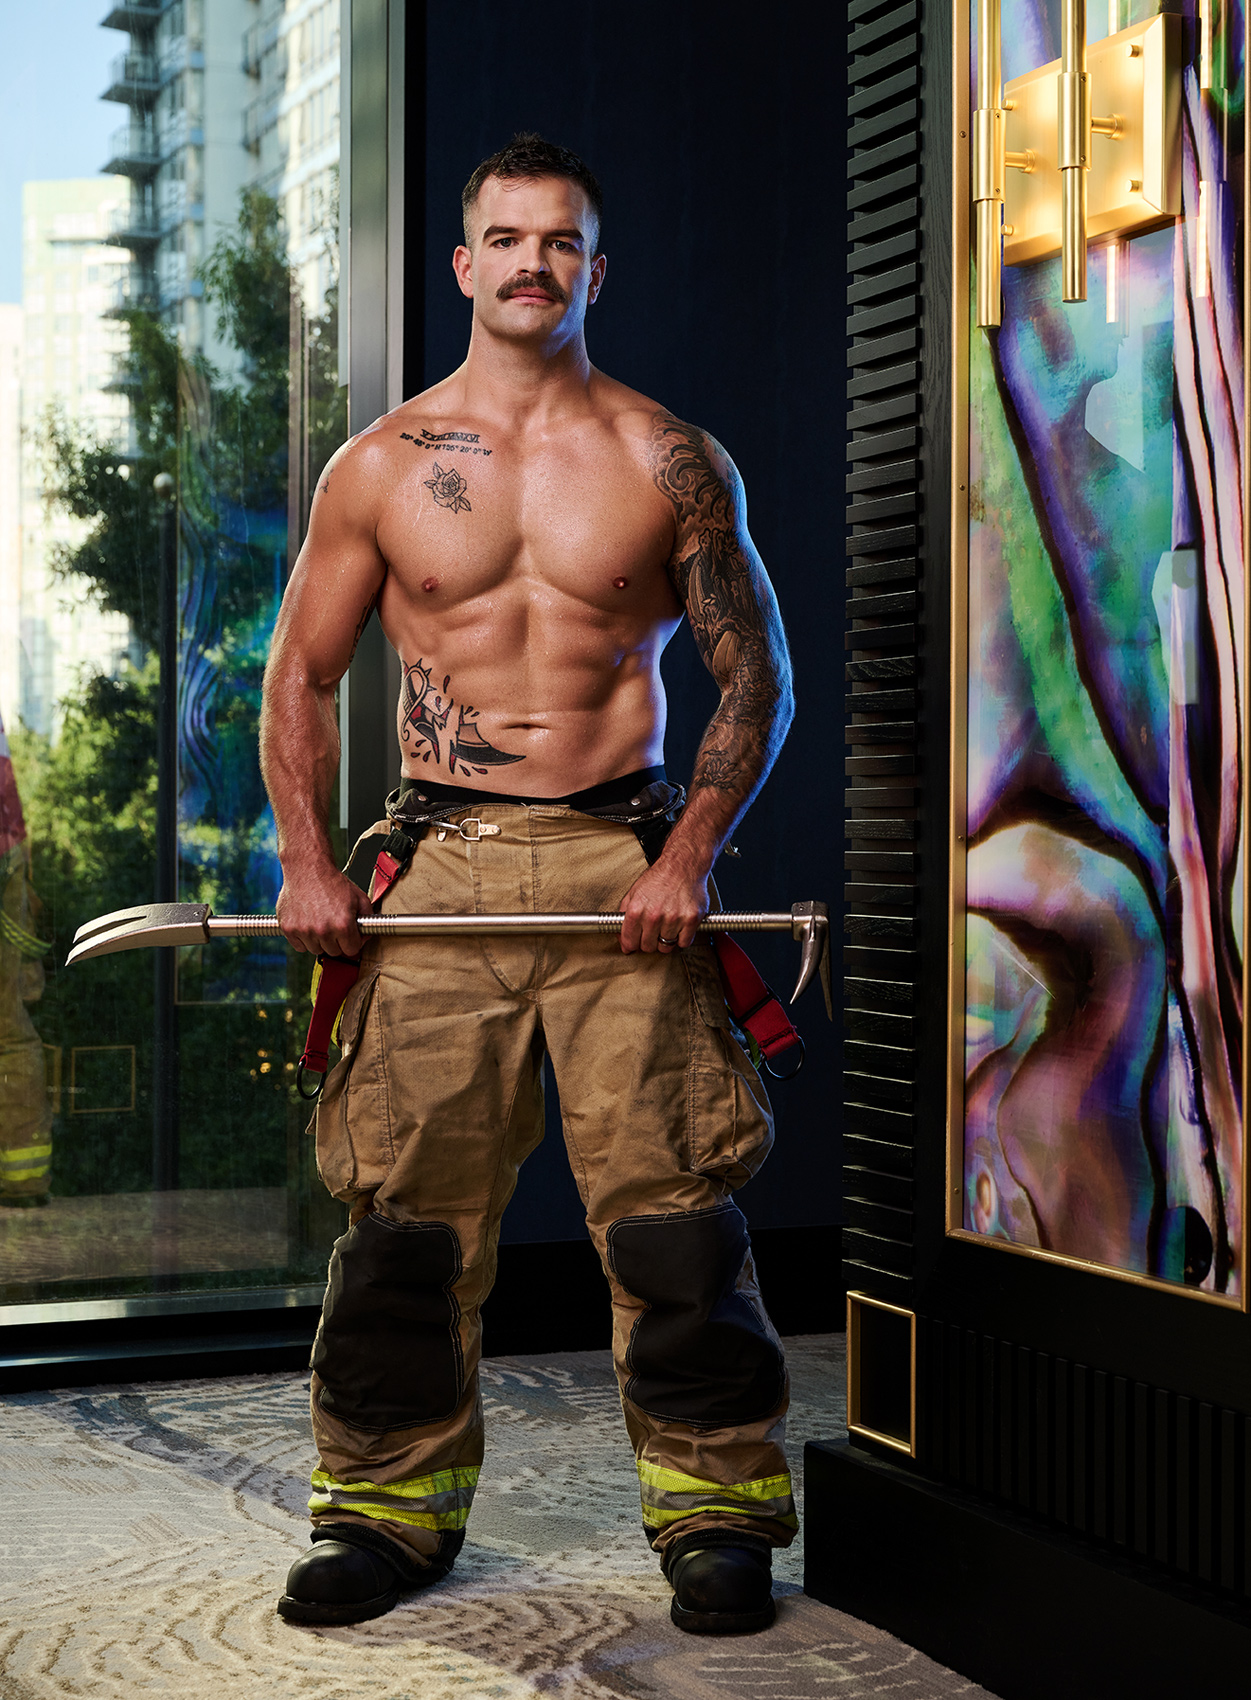 HOF-Hall-of-Flame-Calendar-Erich-Saide-Vancouver-Portrait-Photographer-Firefighters-First-Responders-Hot-Hero-November-MikePaine